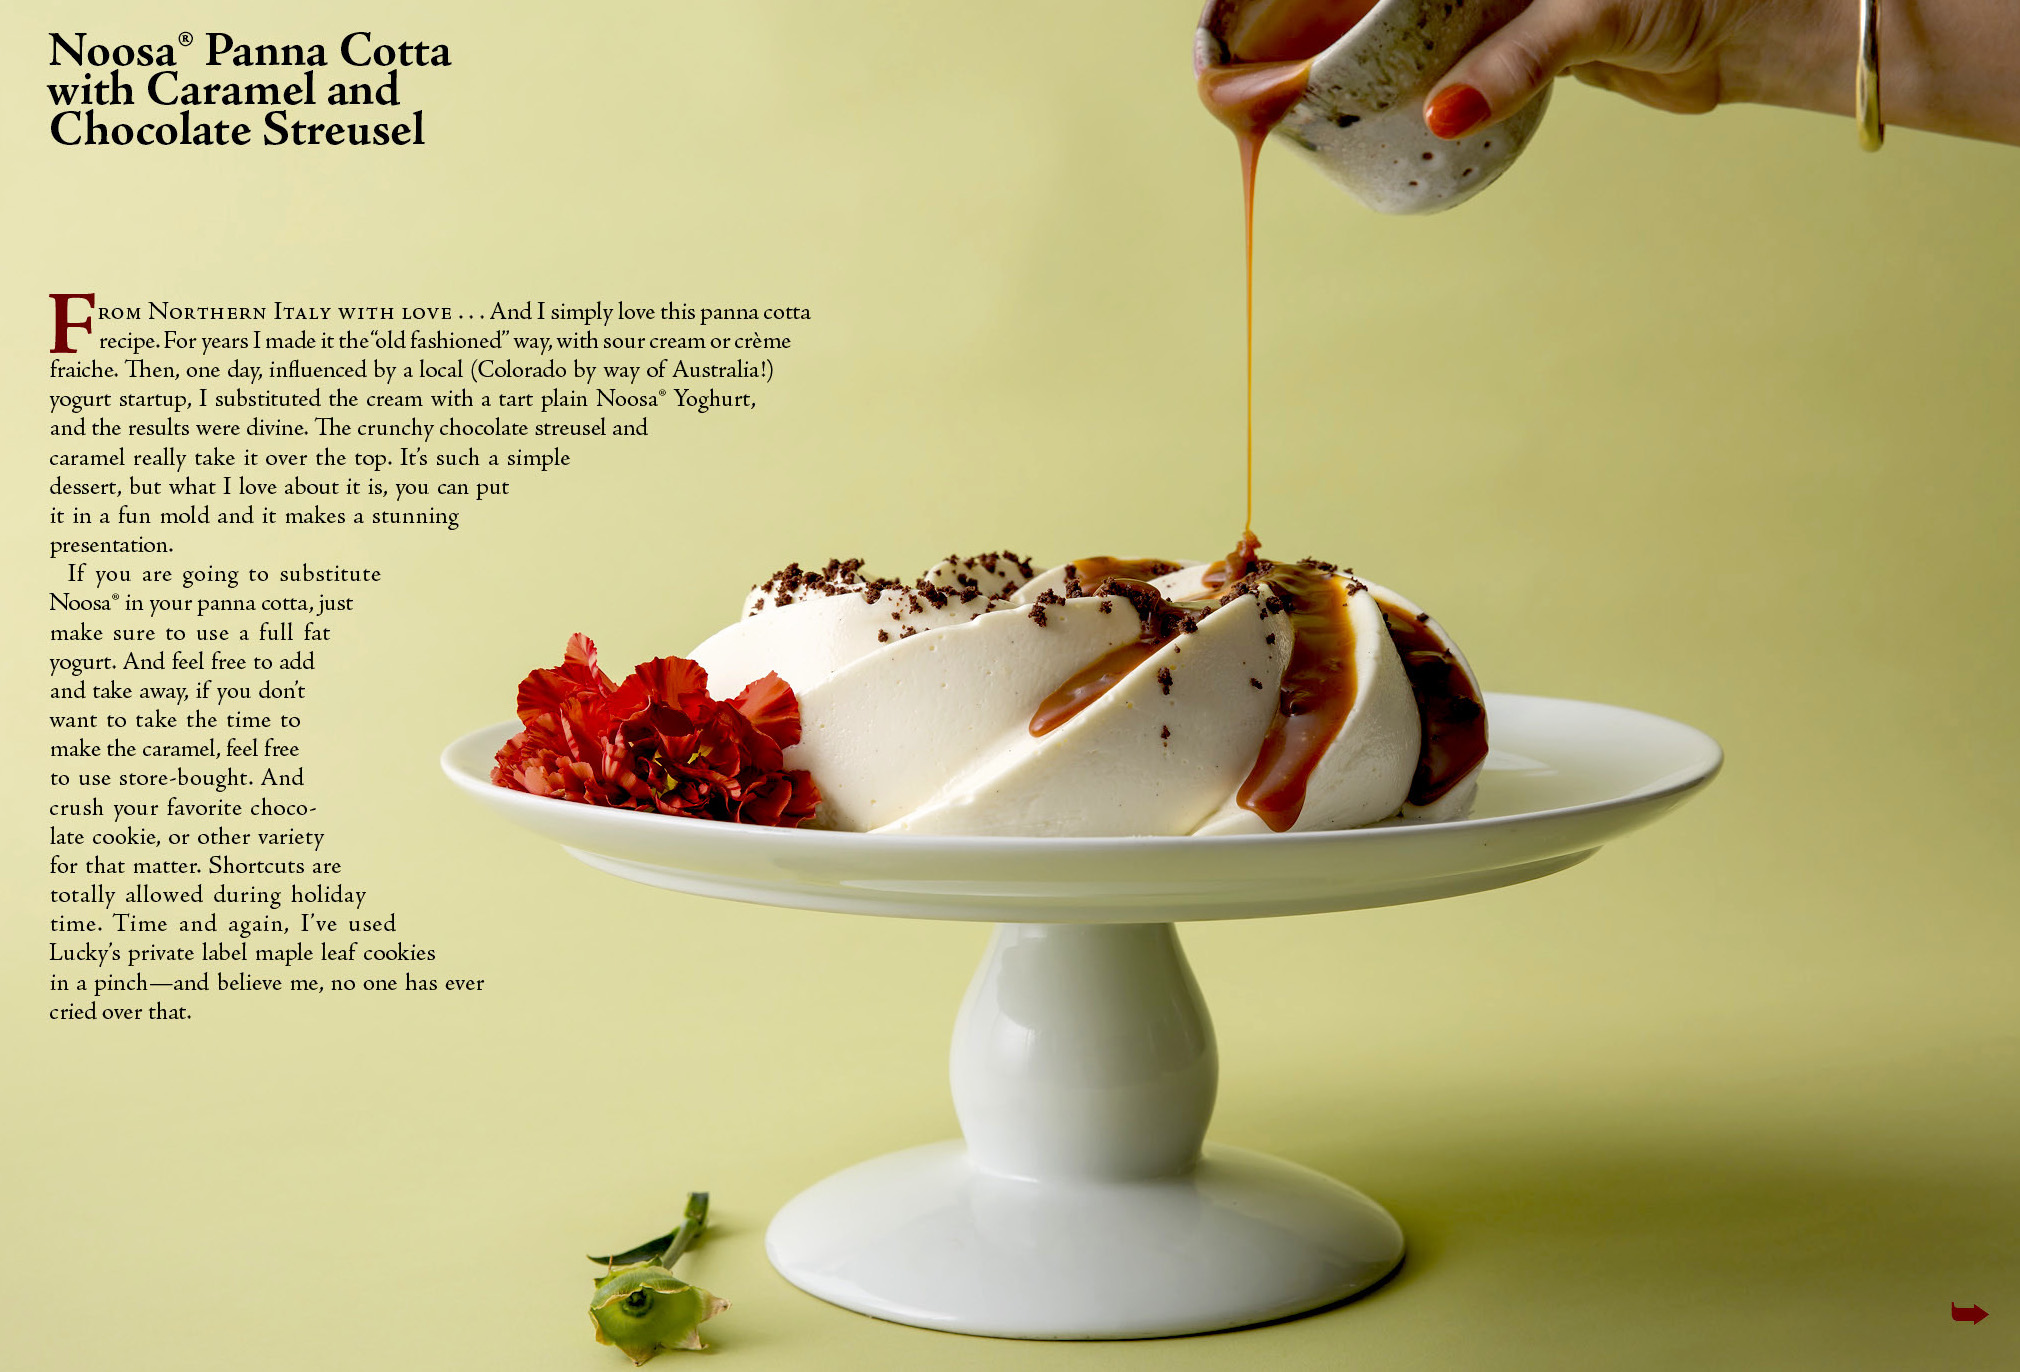 A woman’s hand pouring caramel onto a delicious sculpled white cream dessert, with text describing the dish